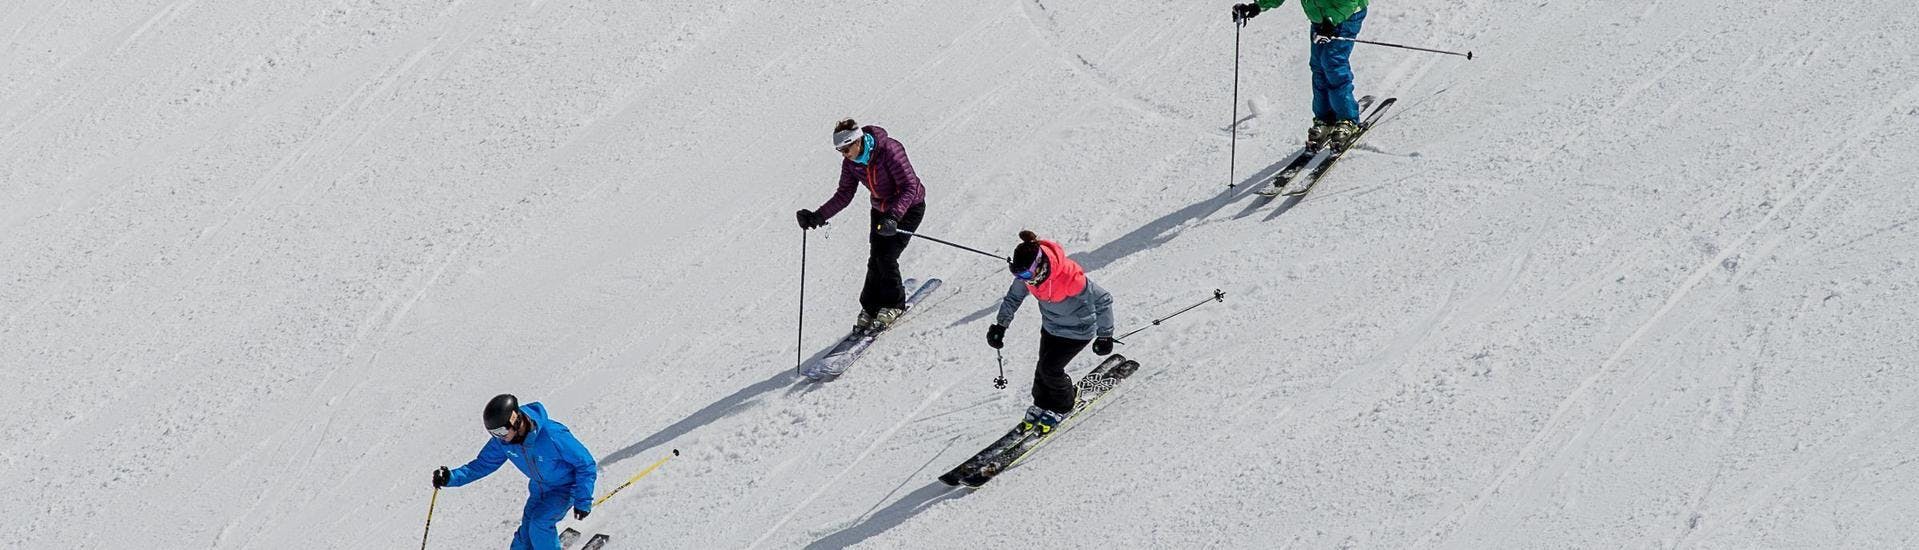 Three skieres are following their ski instructor from the ski school Ski Cool in skiing down a ski slope during one of their Private Ski Lessons for Adults - School Holiday - All Levels in the ski resort of Val Thorens.